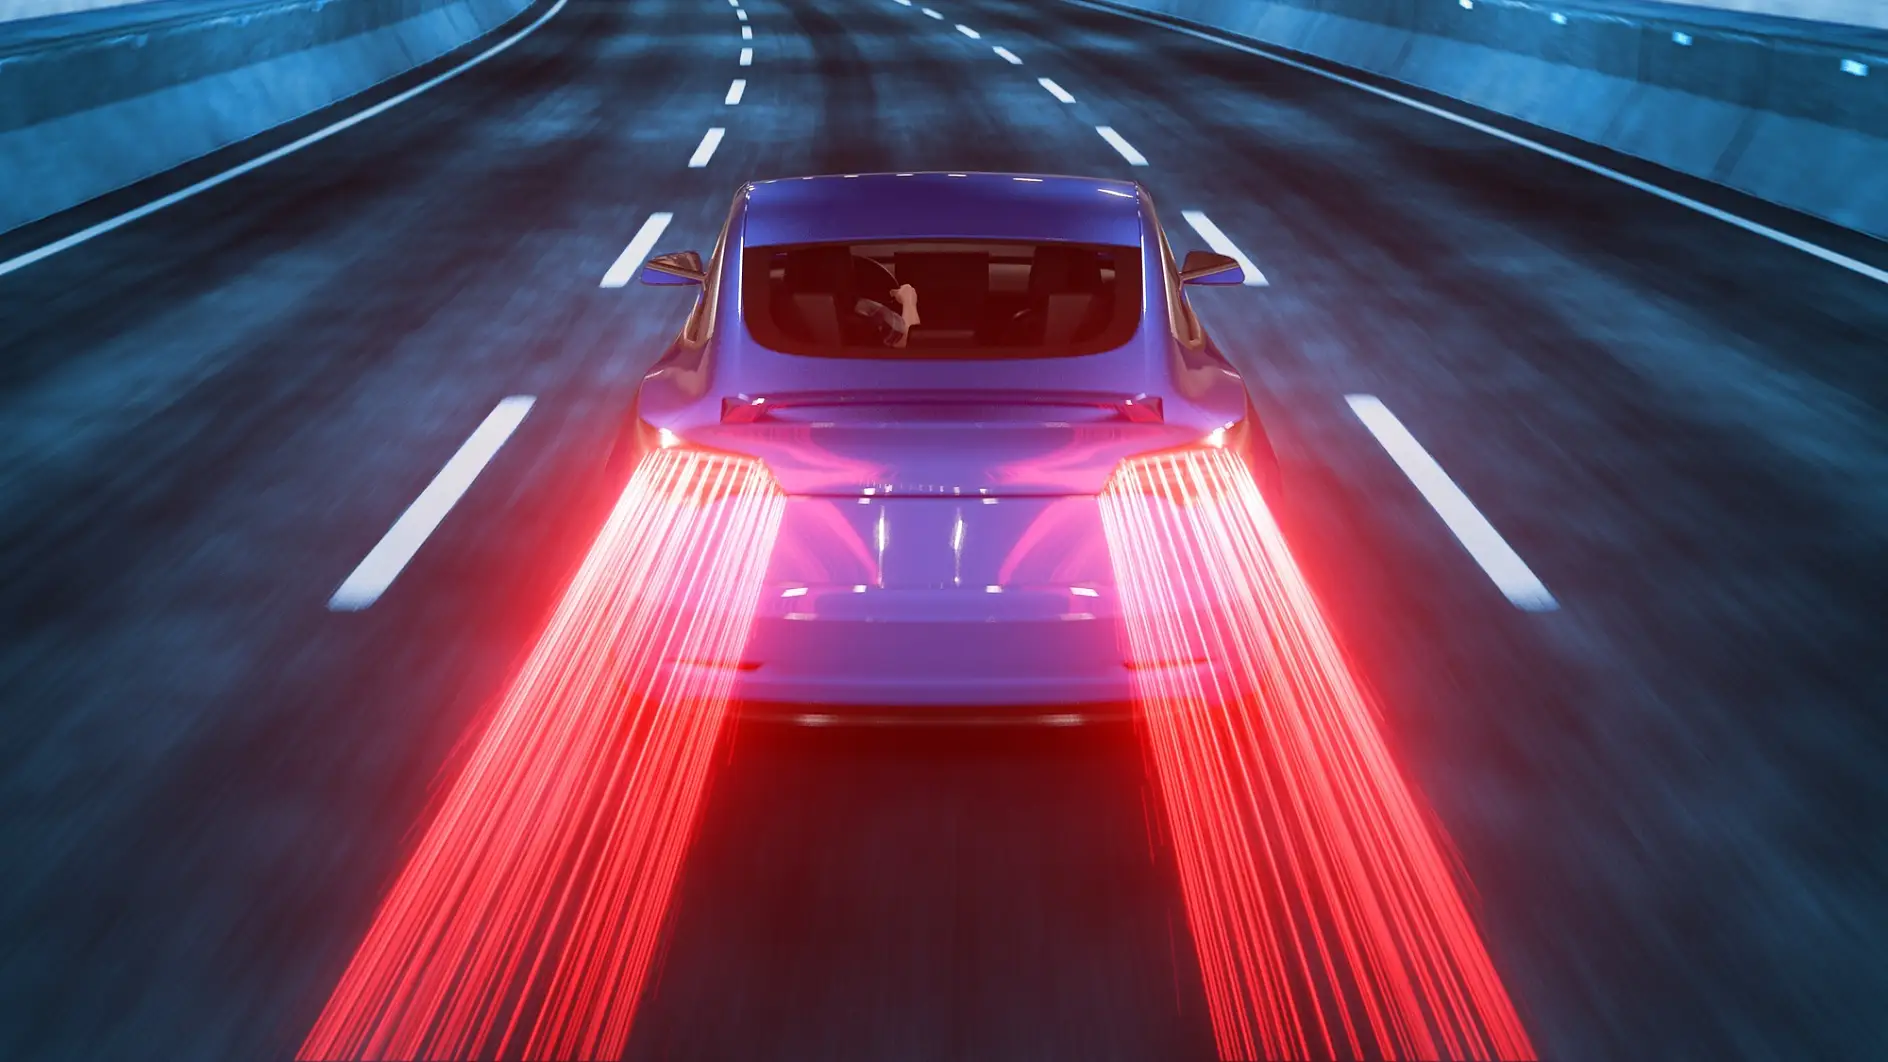 Colored Plug-in electric vehicle with glow and motion blur and red light trails 3d rendering